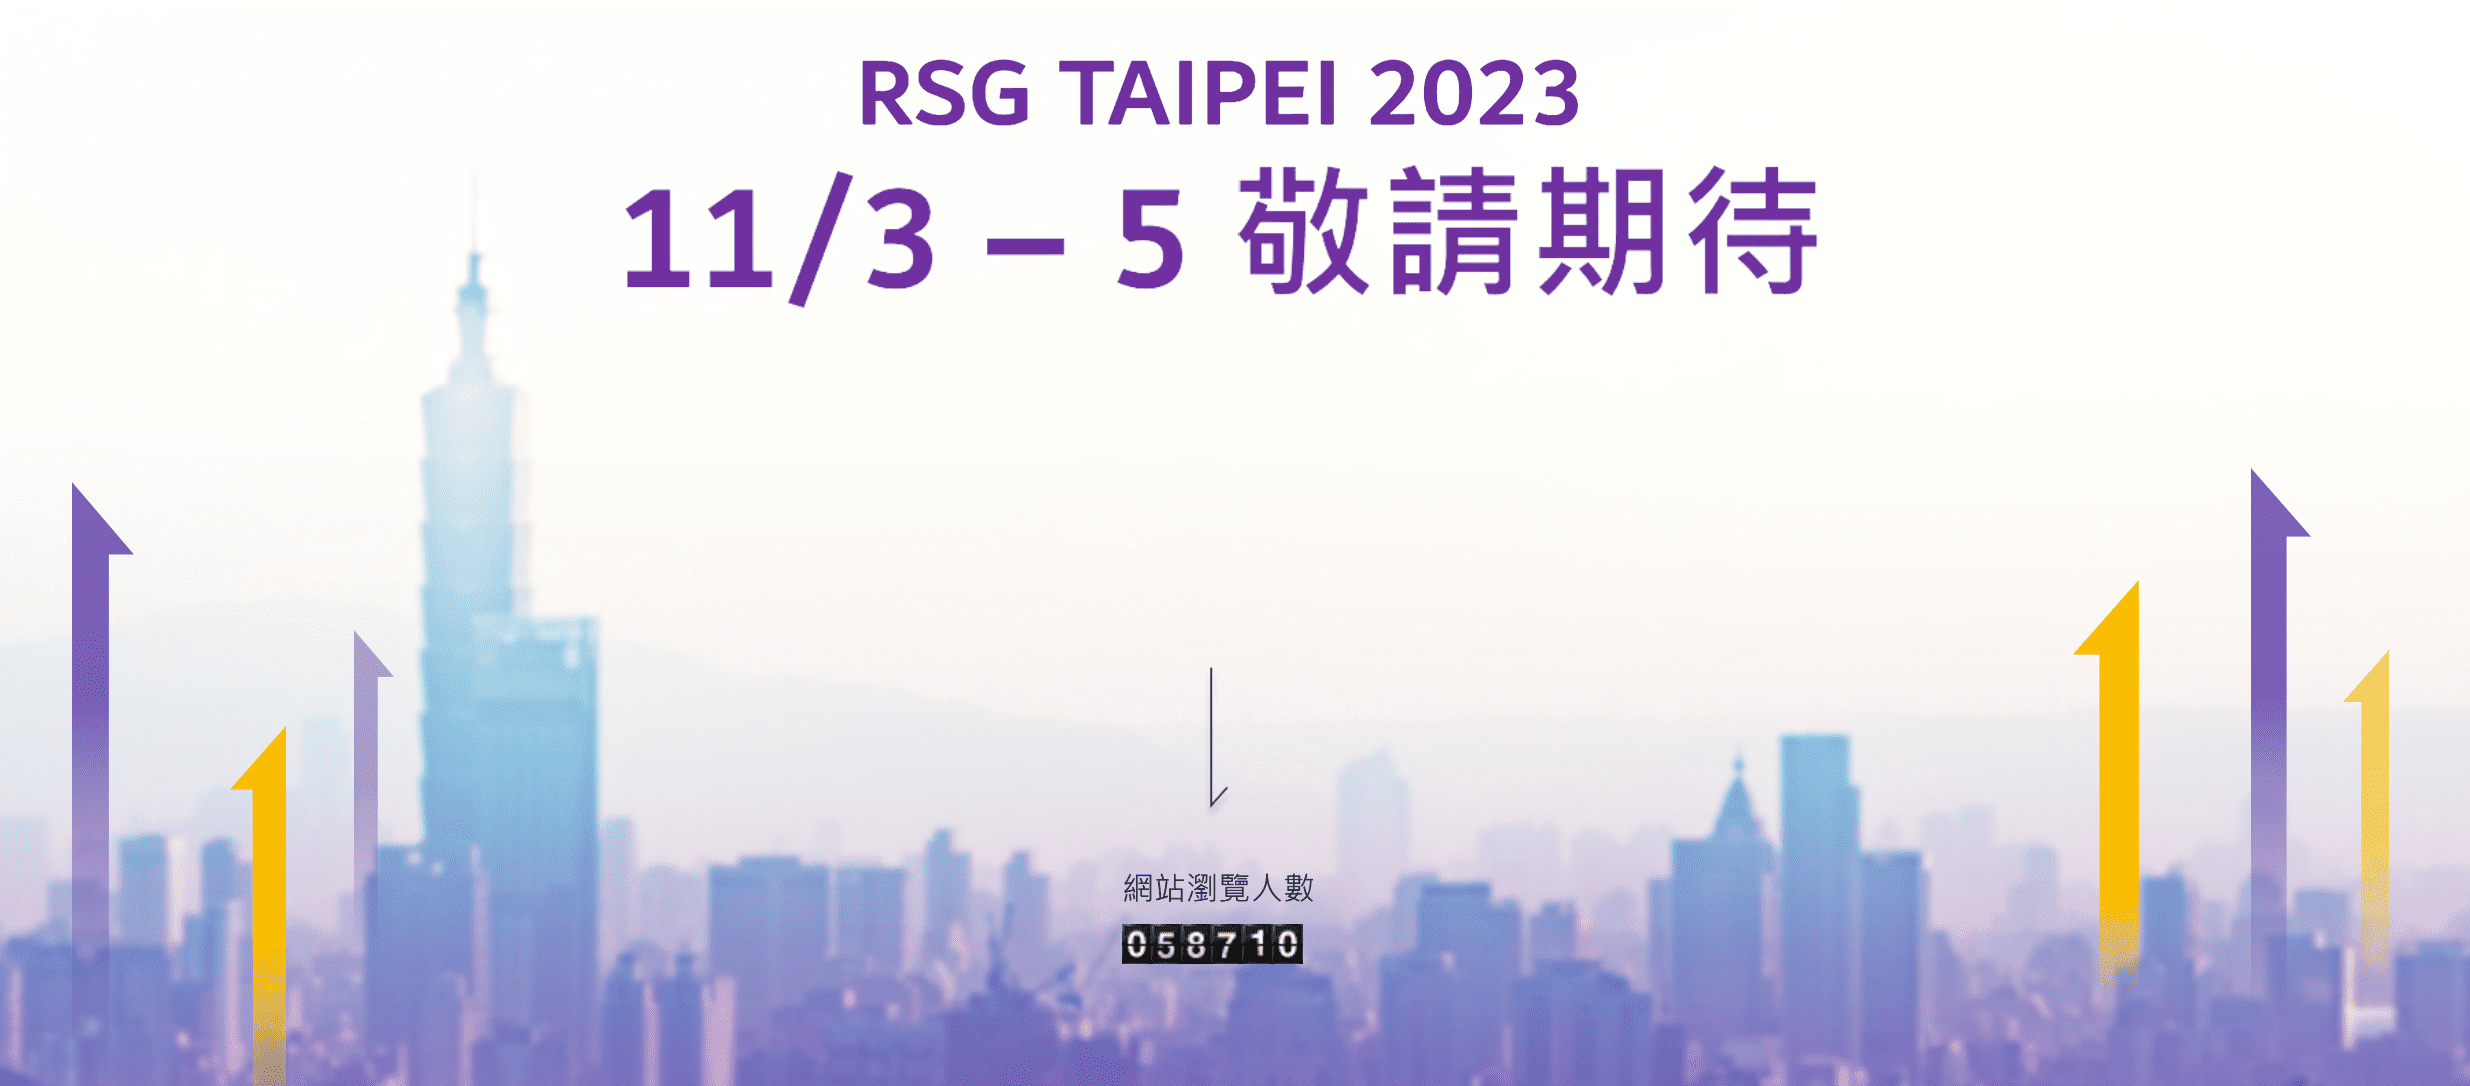 You are currently viewing 2023 Regional Scrum Gathering – Taipei